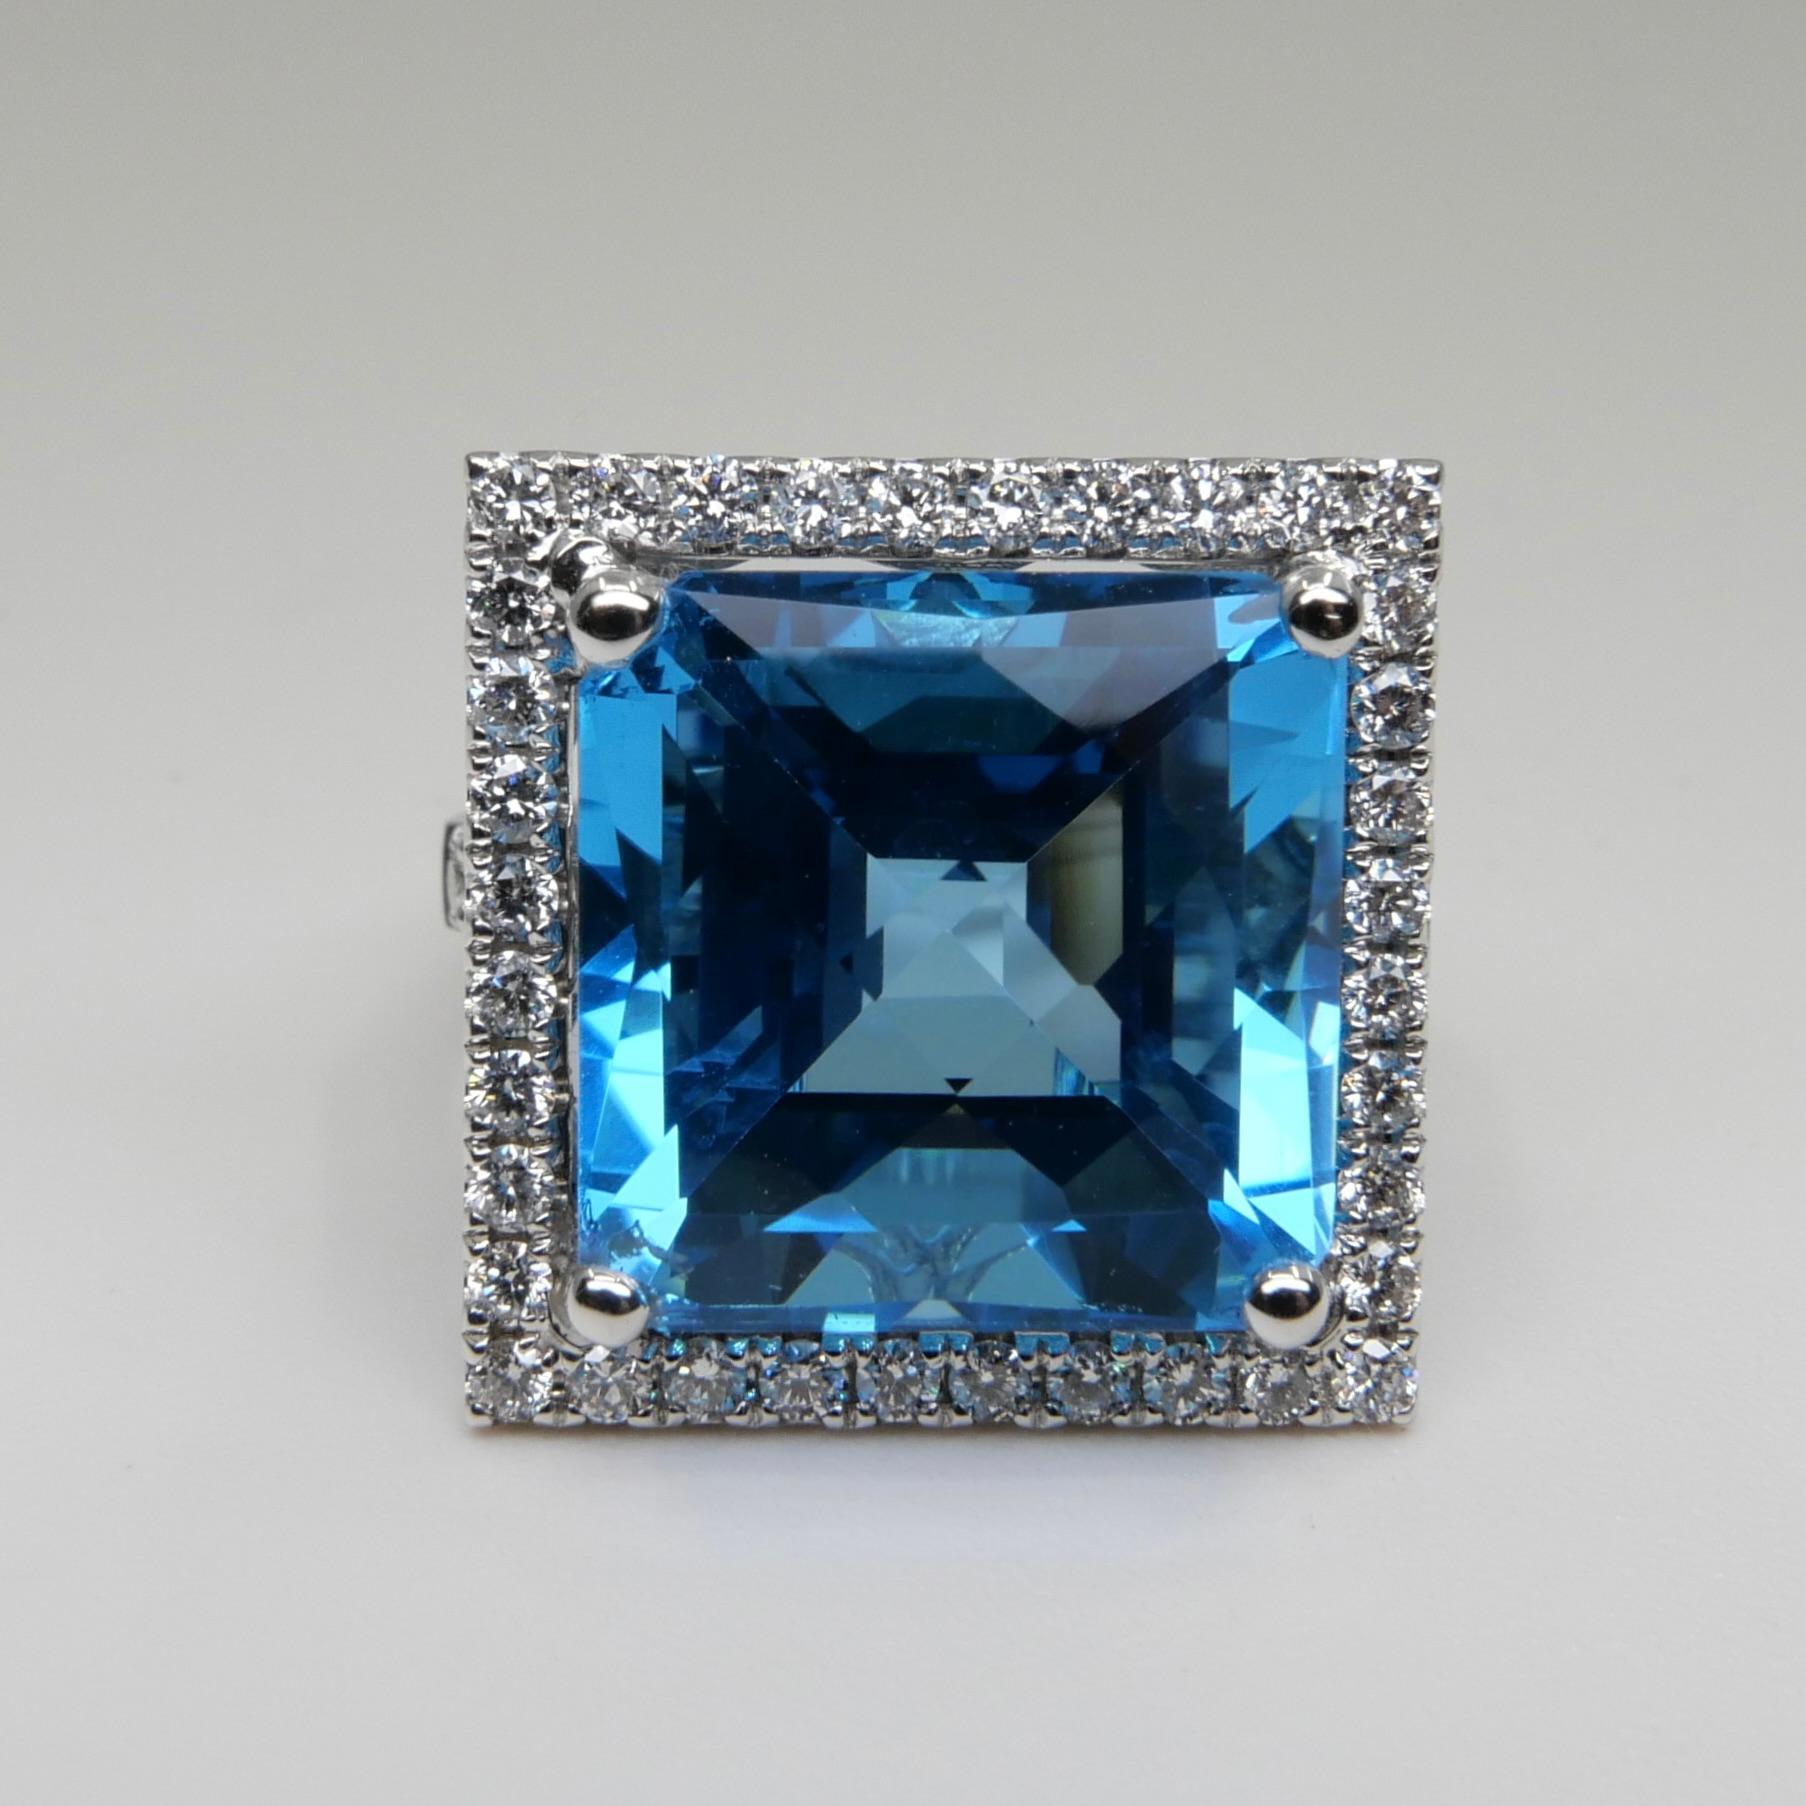  13 Cts checker Square Cut Blue Topaz & Diamond Cocktail Ring. Big Statement. For Sale 4